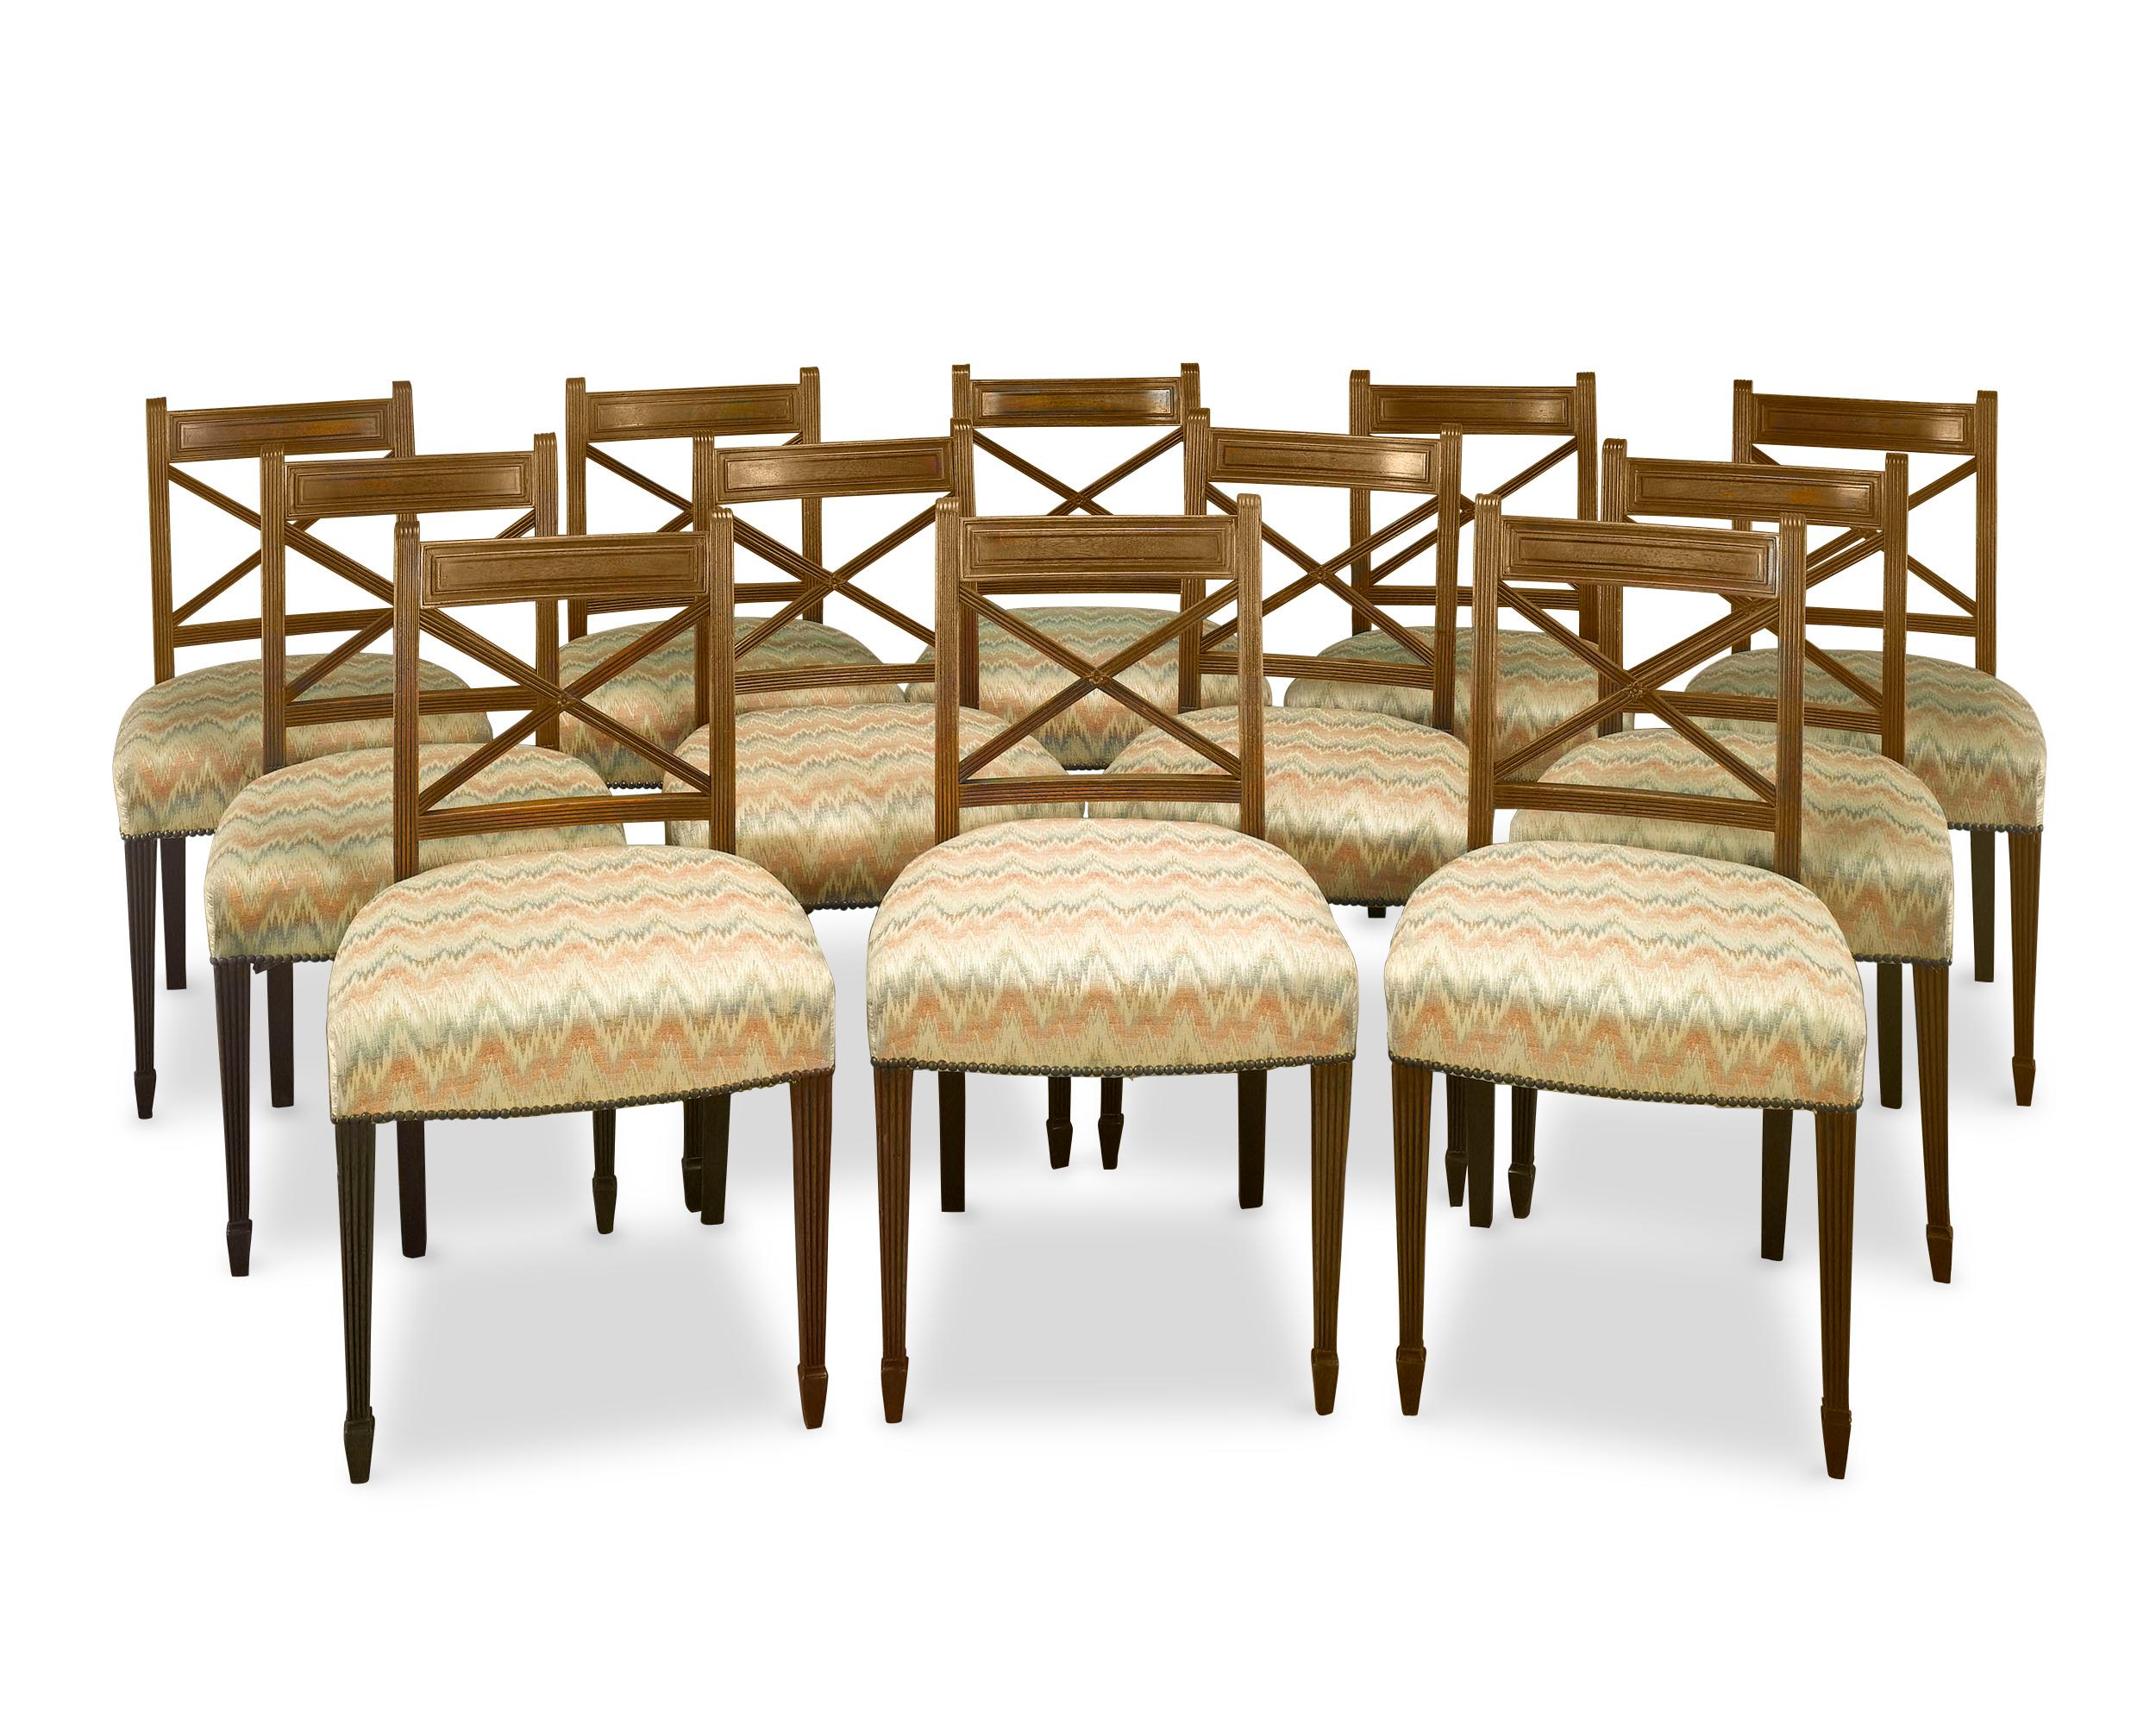 This handsome set of 12 Regency period dining chairs is and exceptional example of Regency furniture in both construction and design. The chairs are crafted of rich mahogany and are distinguished by cross-ribbon backs and saber hind legs inspired by